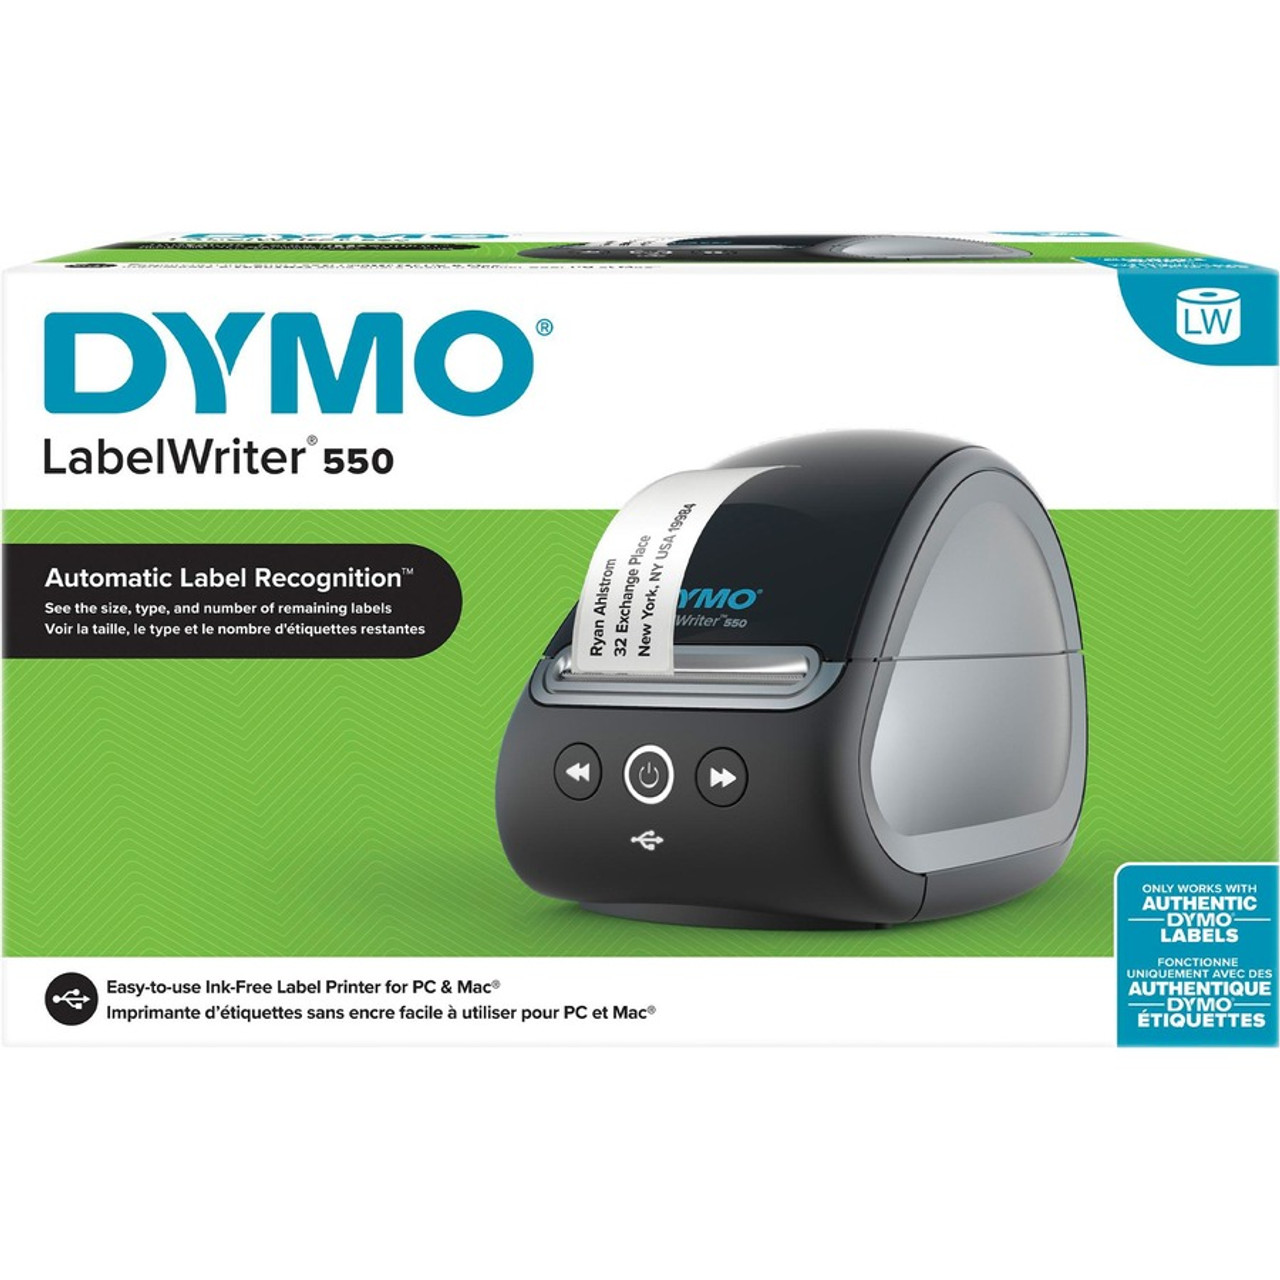 DYMO LabelWriter 550 USB Label Printer Direct Thermal Printing, USB Wired  Connectivity, Prints up to 62 Labels Per Minute, Automatic Label Recogniti  通販